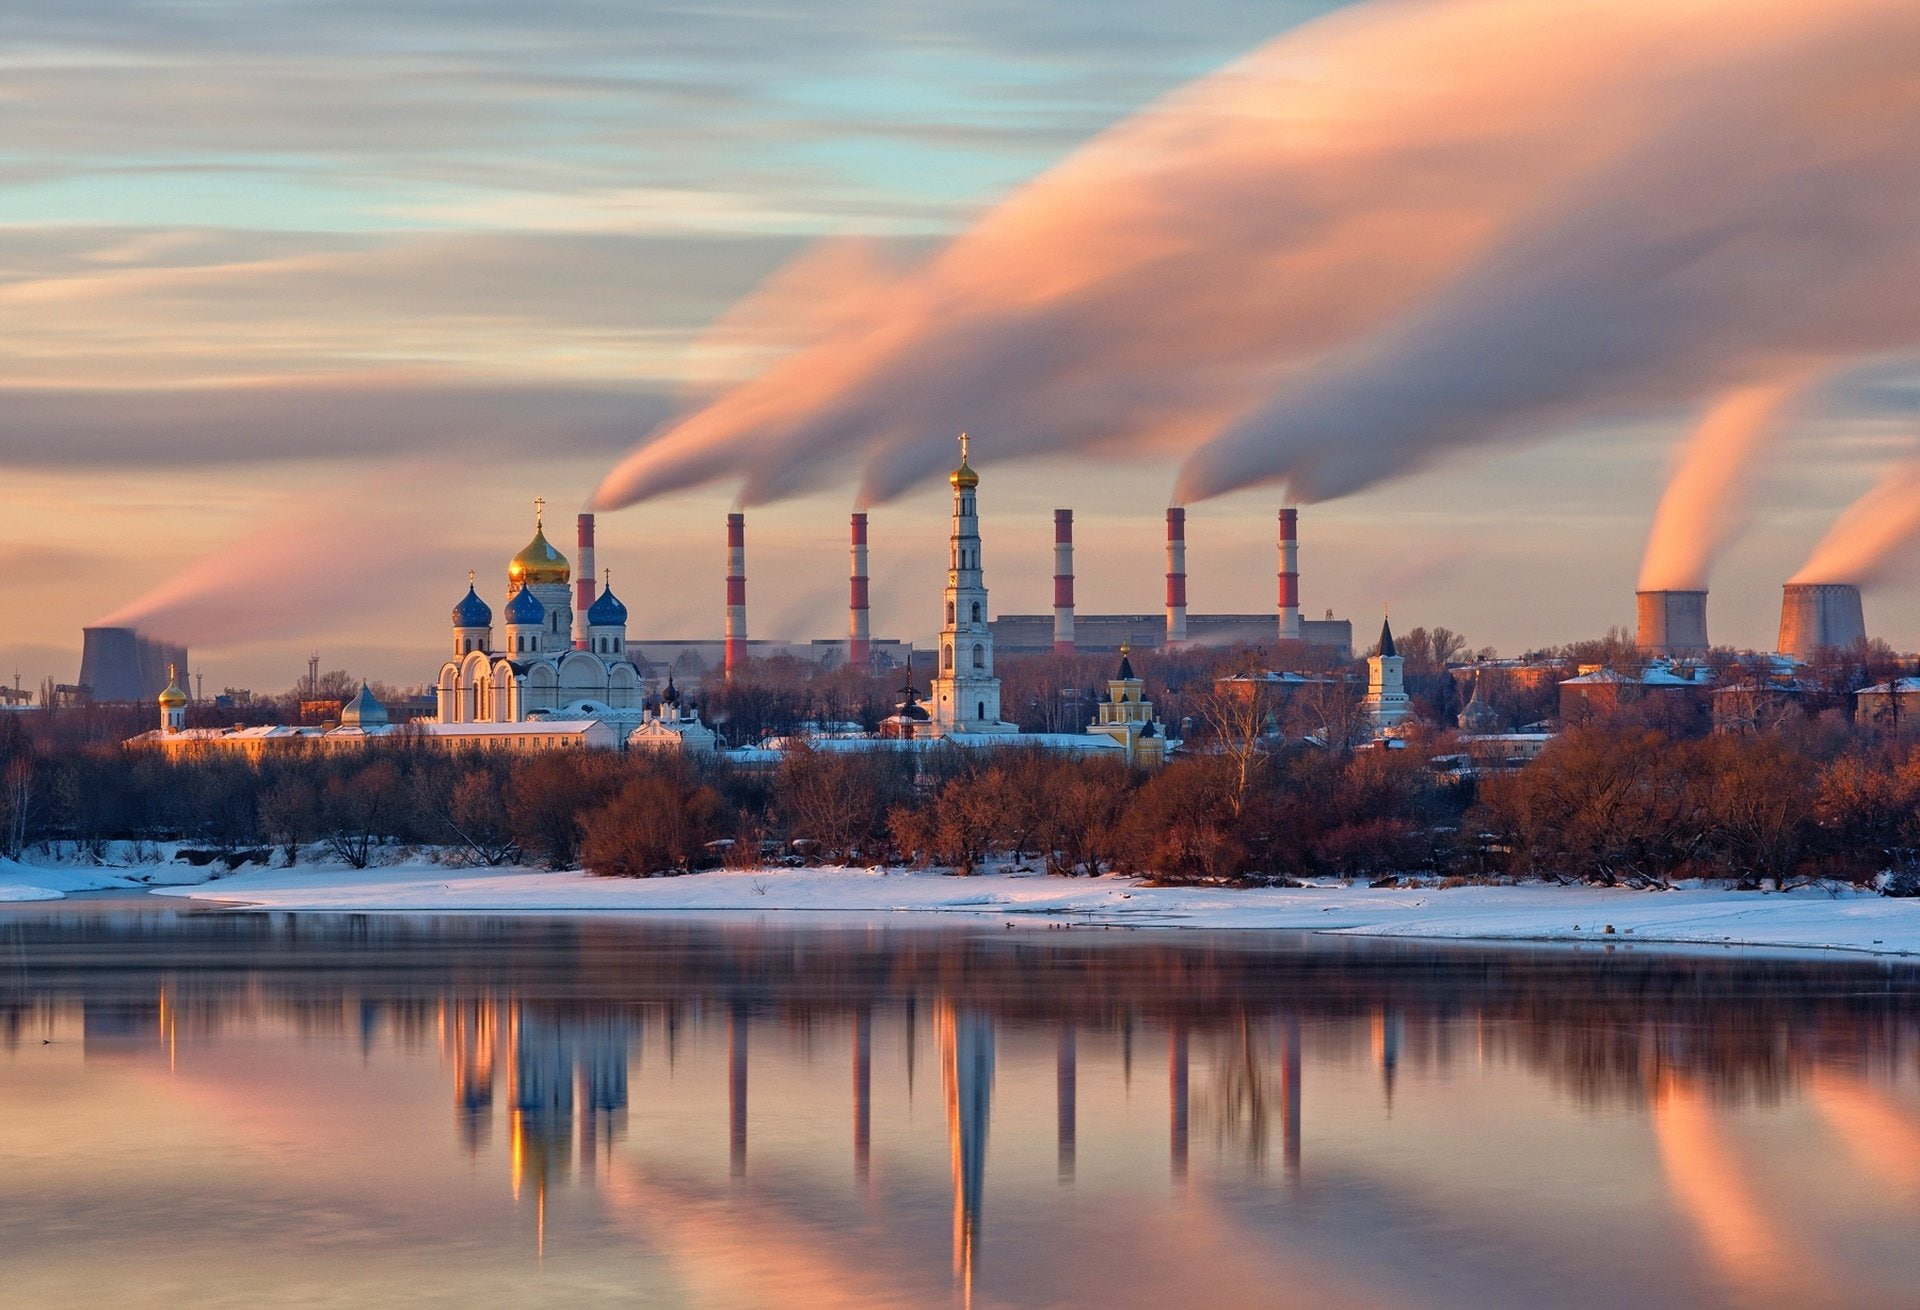 Man Made, Power Plant, Nuclear Plant, Reflection, Russia, Smoke